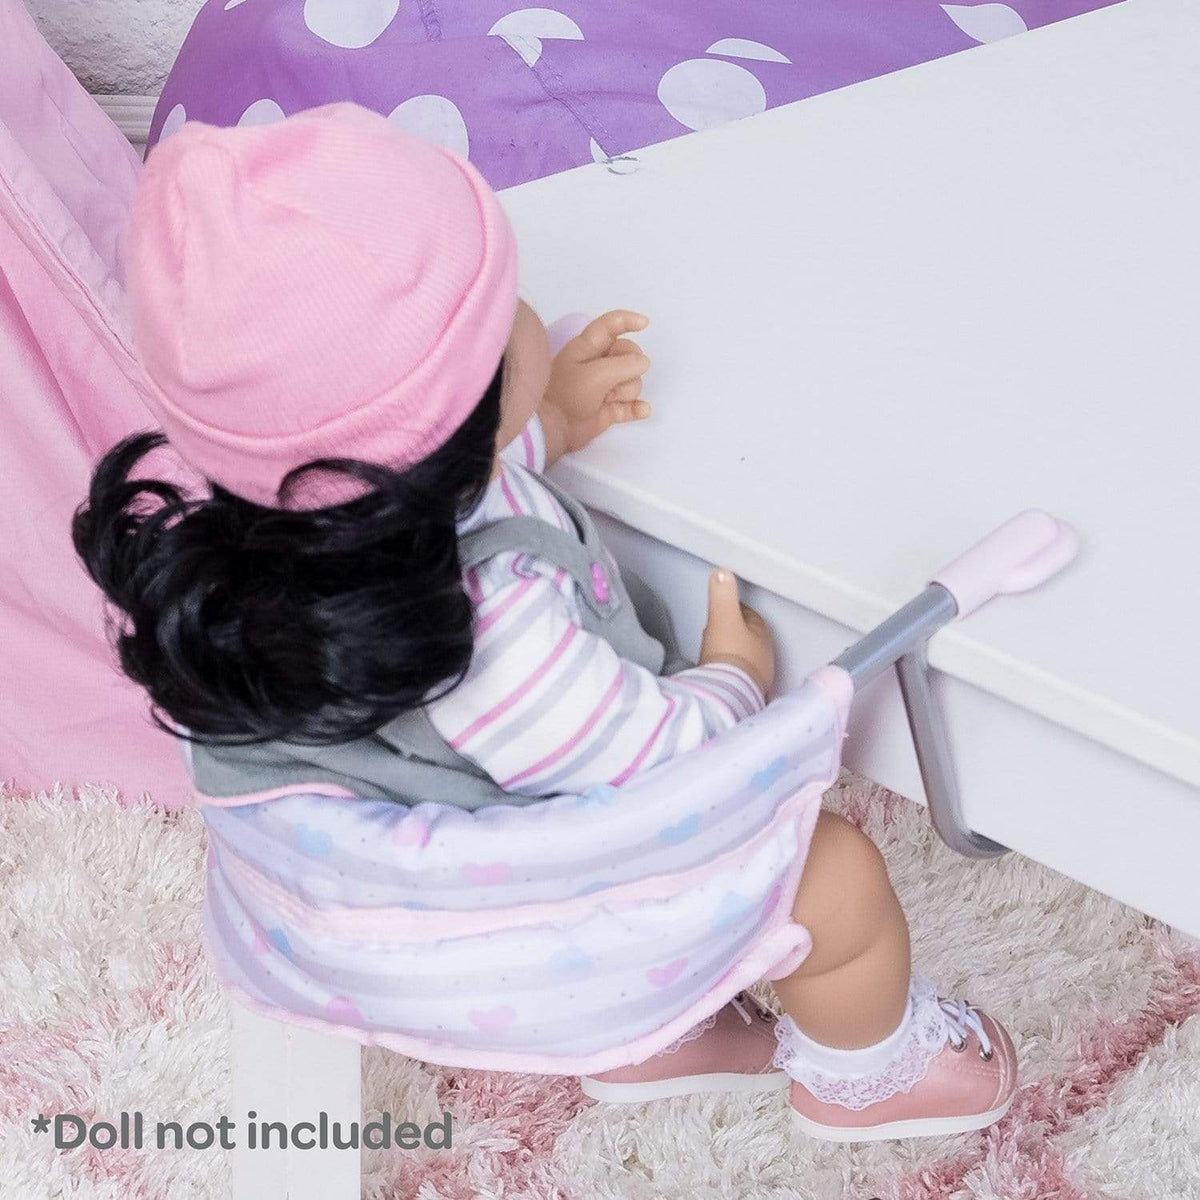 Adora Table Feeding Seat, Baby Doll Accessories in Classic Pastel Pink